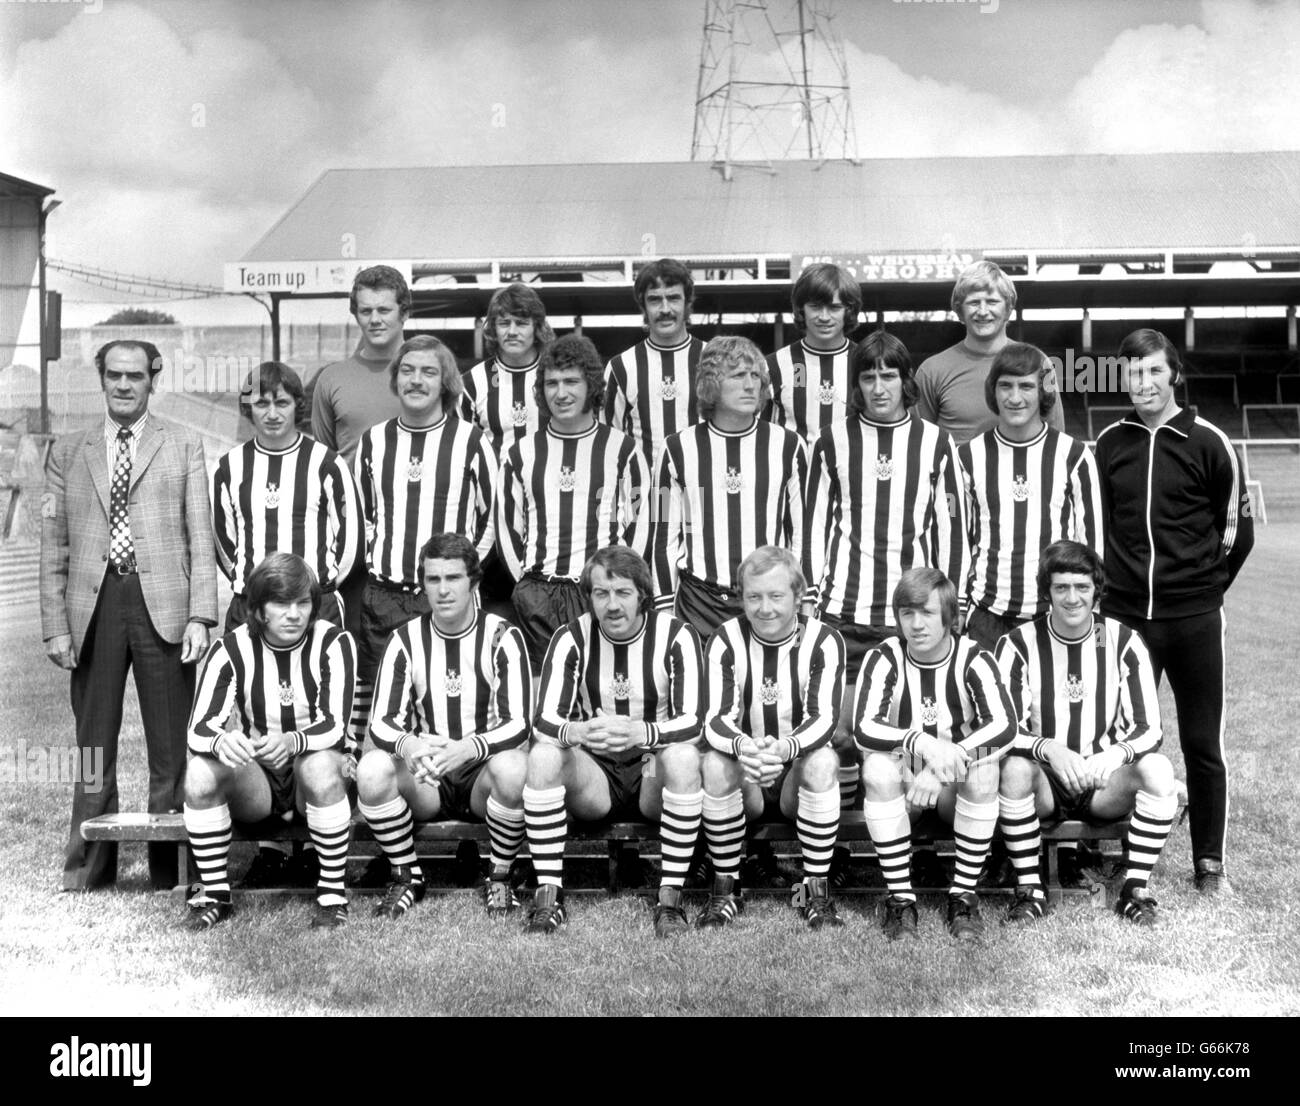 The first team squad of Newcastle United, who meet Liverpool in this year's FA Cup final at Wembley on May 4. (Back row l-r) Martin Burleigh, Stewart Barrowclough, Tommy Gibb, Irving Nattrass and Iam McFaul. (Middle row l-r) Joe Harvey (manager), David Craig, Gordon Hodgson, Tommy Cassidy, Pat Howard, Jimmy Smith, Terry McDermott and Keith Birkinshaw (trainer). (Front row l-r) Malcolm MacDonald, Bobby Moncur, Frank Clark, John Tudor, Tony Green and Terry Hibbitt. Stock Photo